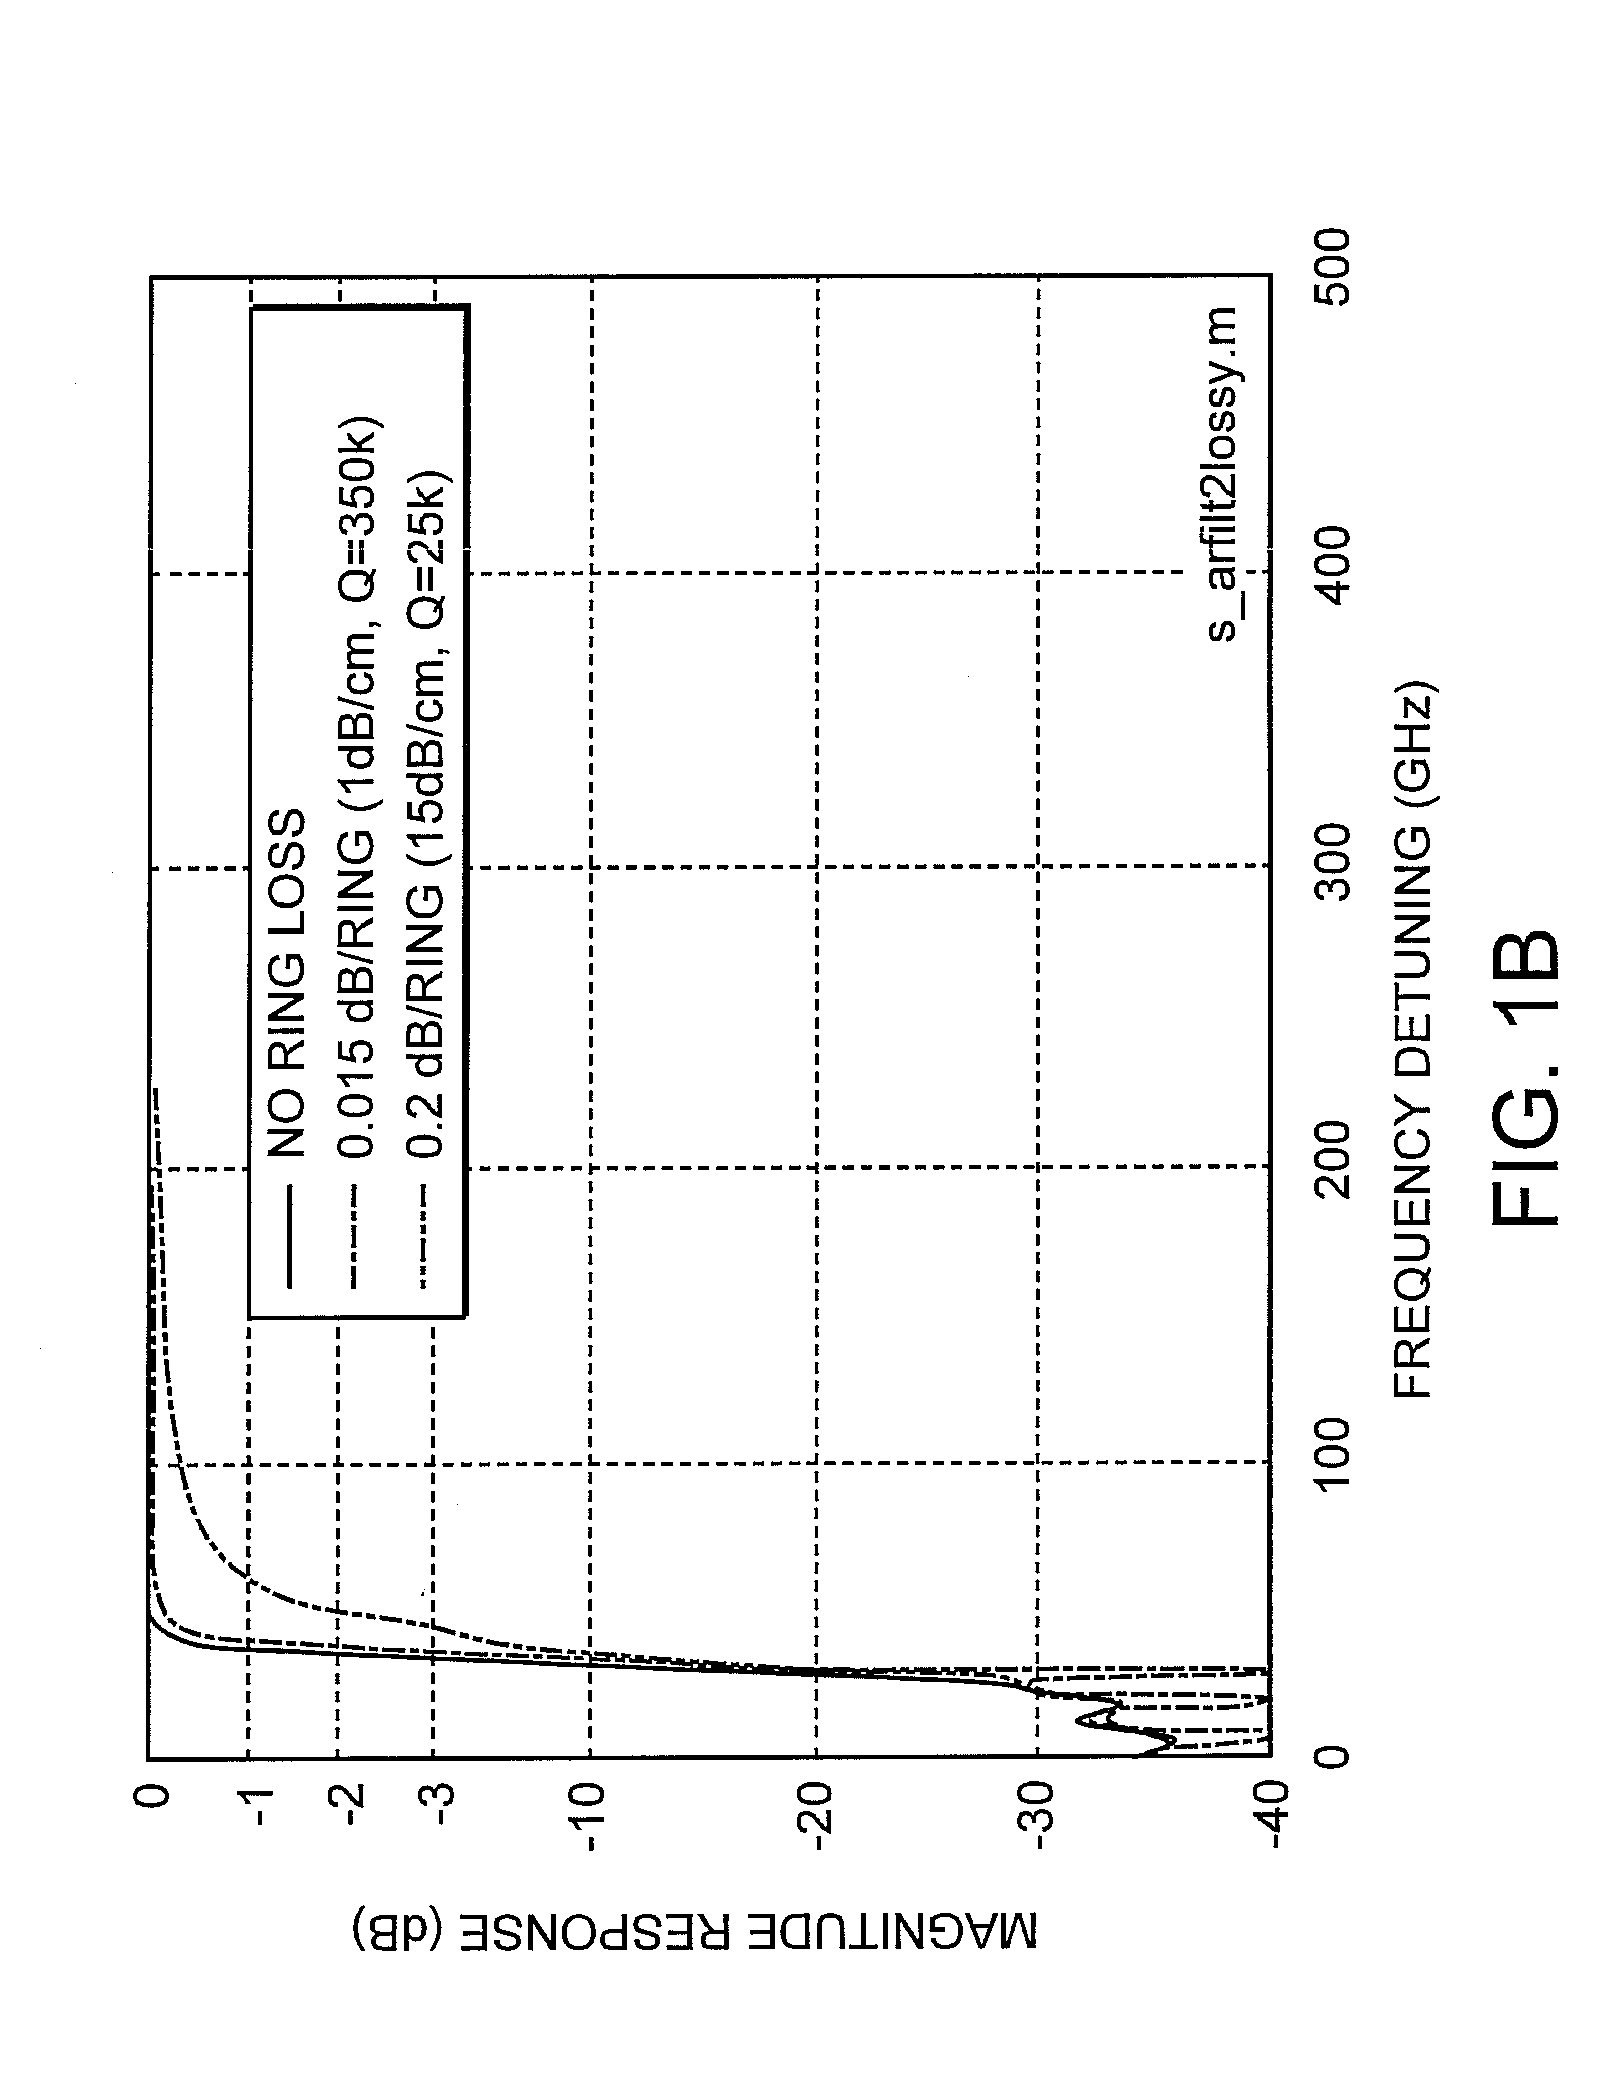 Optical coupled-resonator filters with asymmetric coupling